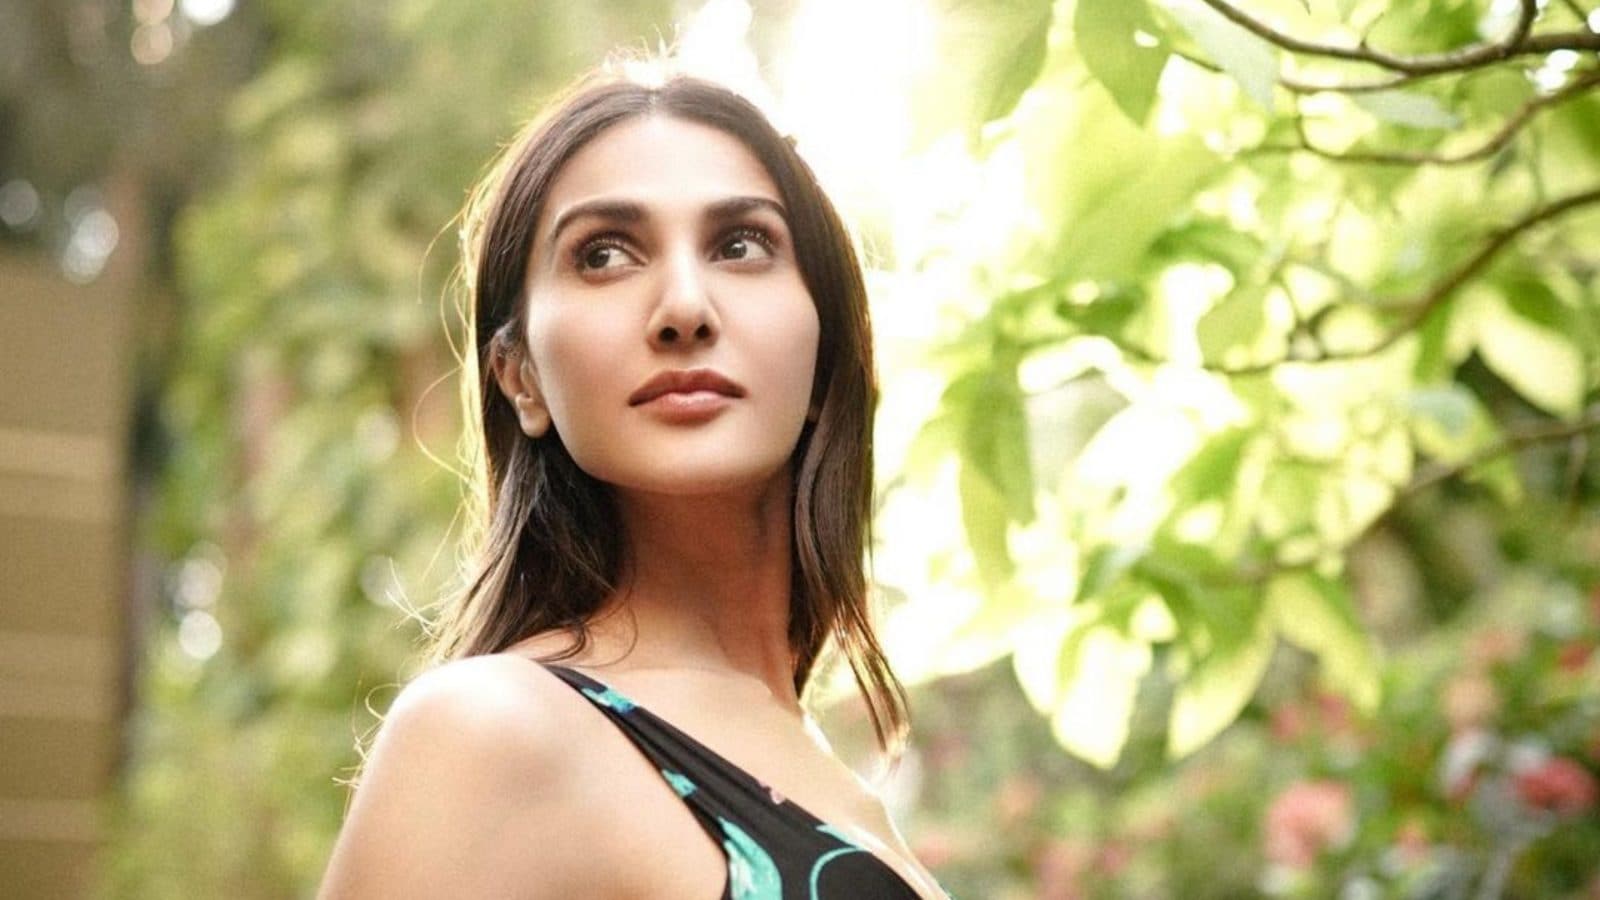 Xxxvideo Kriti - Vaani Kapoor To Play a Porn Star Look-Alike In Her Upcoming Movie? Here's  What We Know - News18